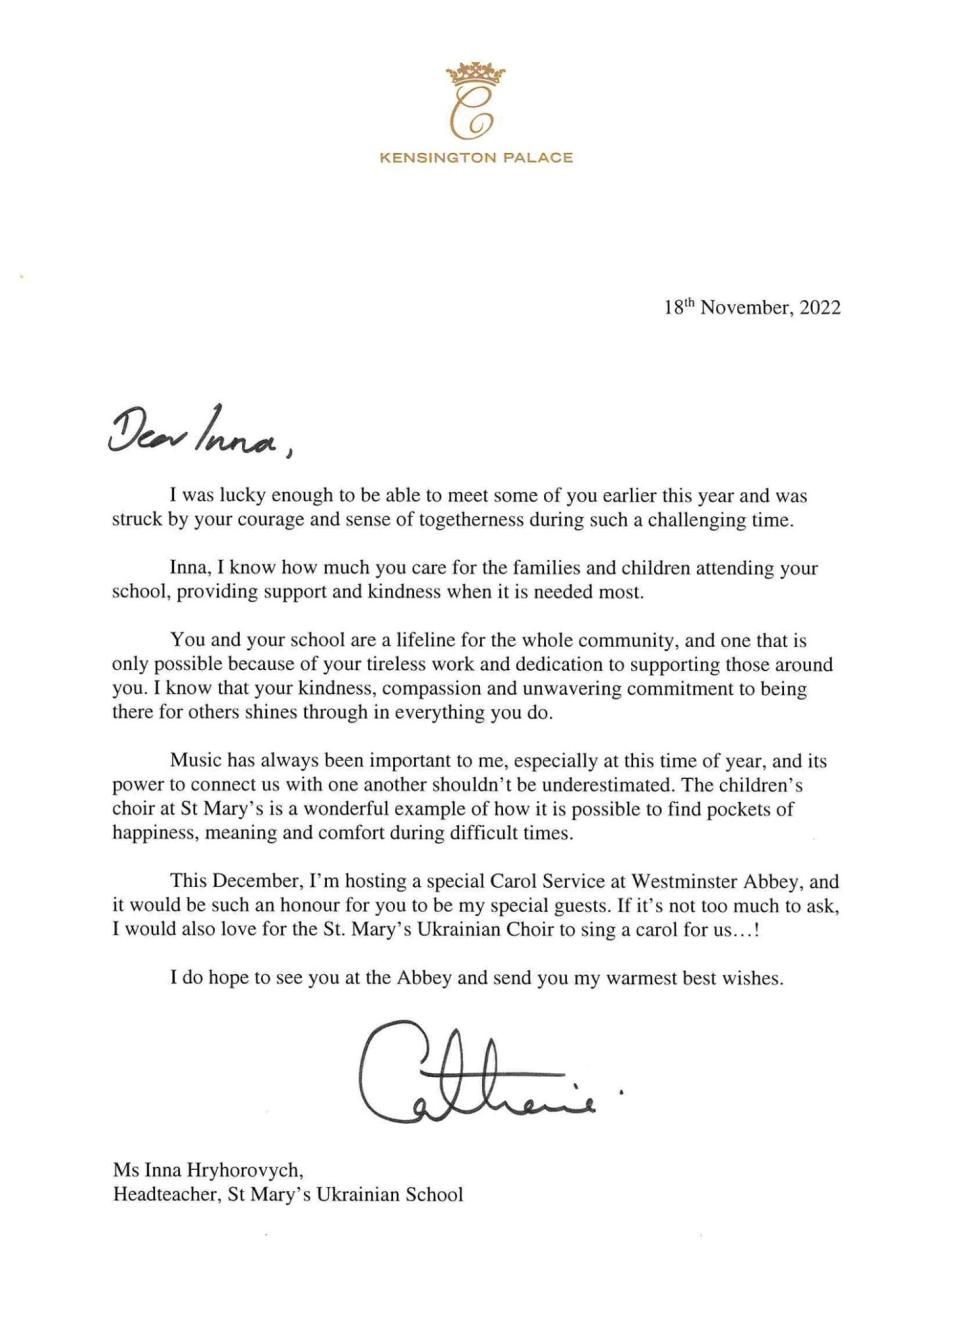 A letter from Catherine, Princess of Wales to the headteacher, Inna Hryhorovych of the Ukrainian school in London that sung a carol for her Together at Christmas concert at Westminster Abbey